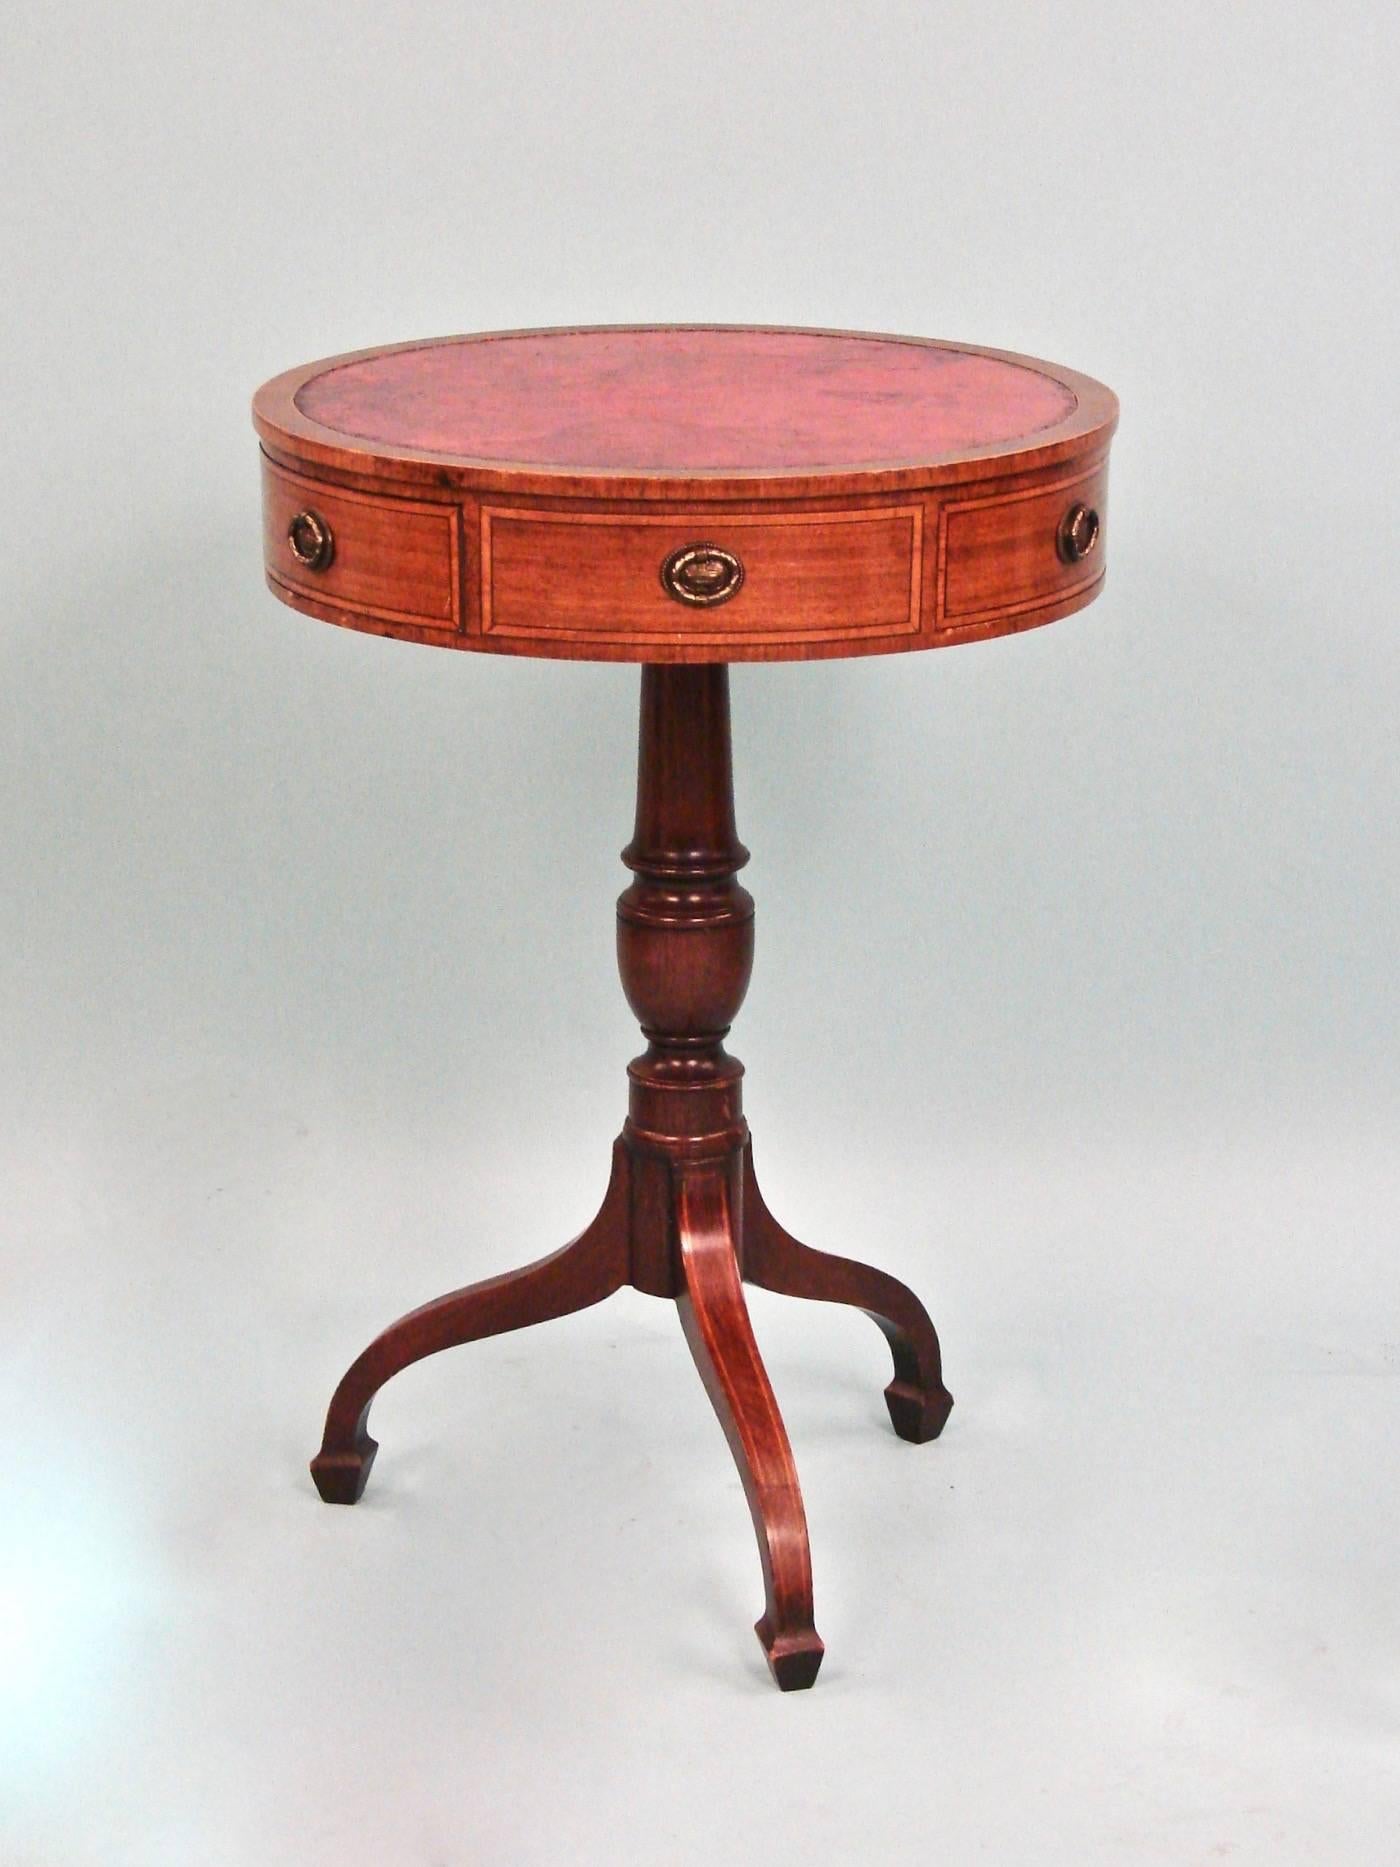 20th Century Regency Style Inlaid Mahogany Small Drum Table with Tooled Red Leather Top